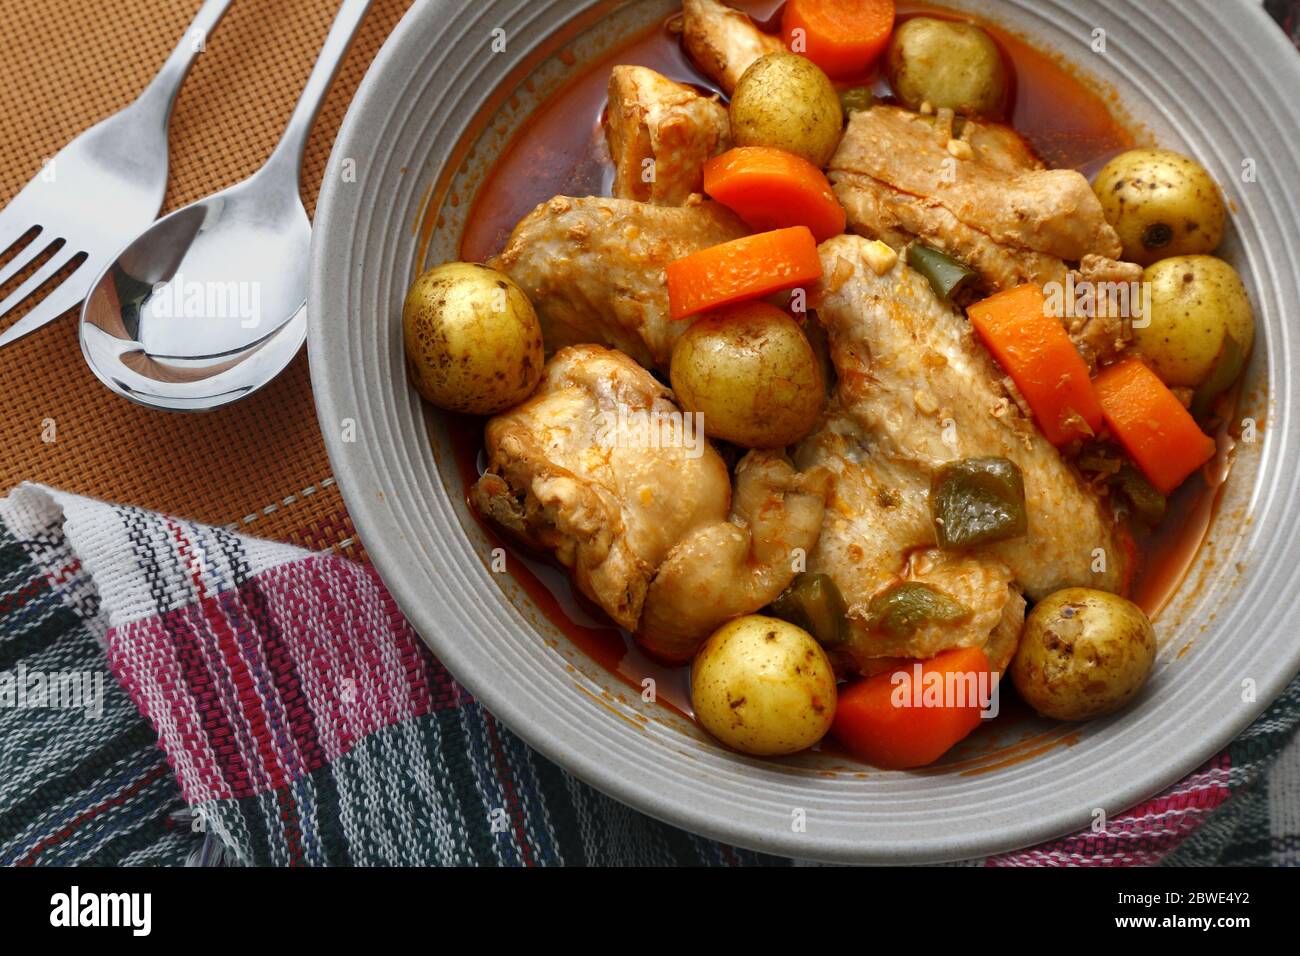 Photo of freshly cooked Filipino food Chicken Afritada or chicken cooked in tomato sauce with potatoes and carrots. Stock Photo